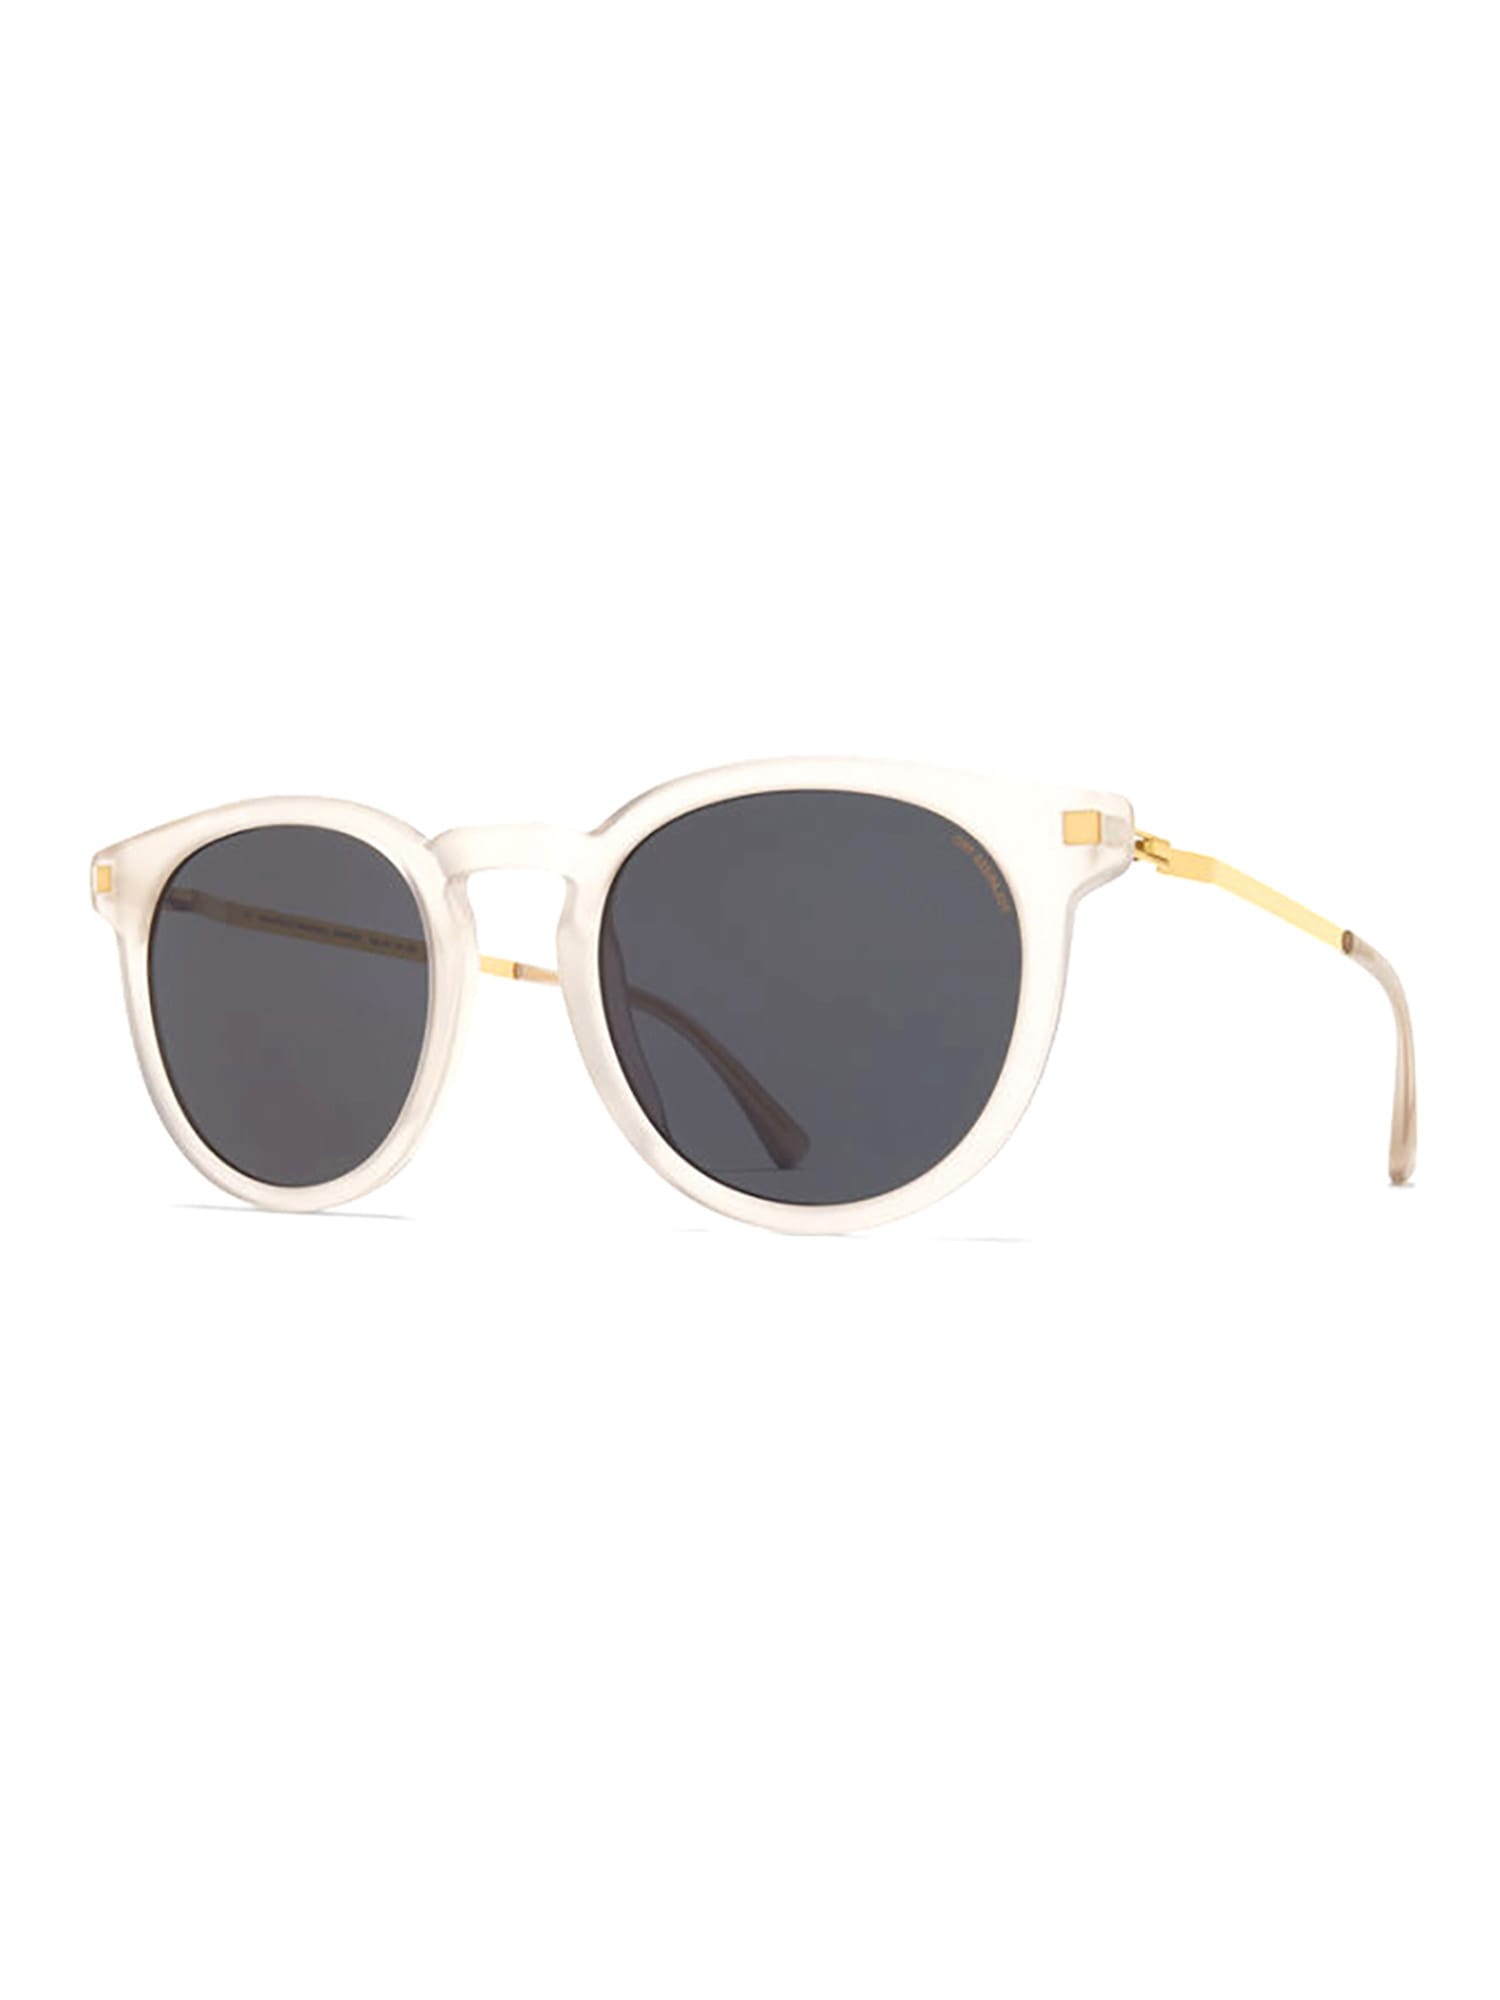 Mykita 16h73yw0a In _mchp/gg